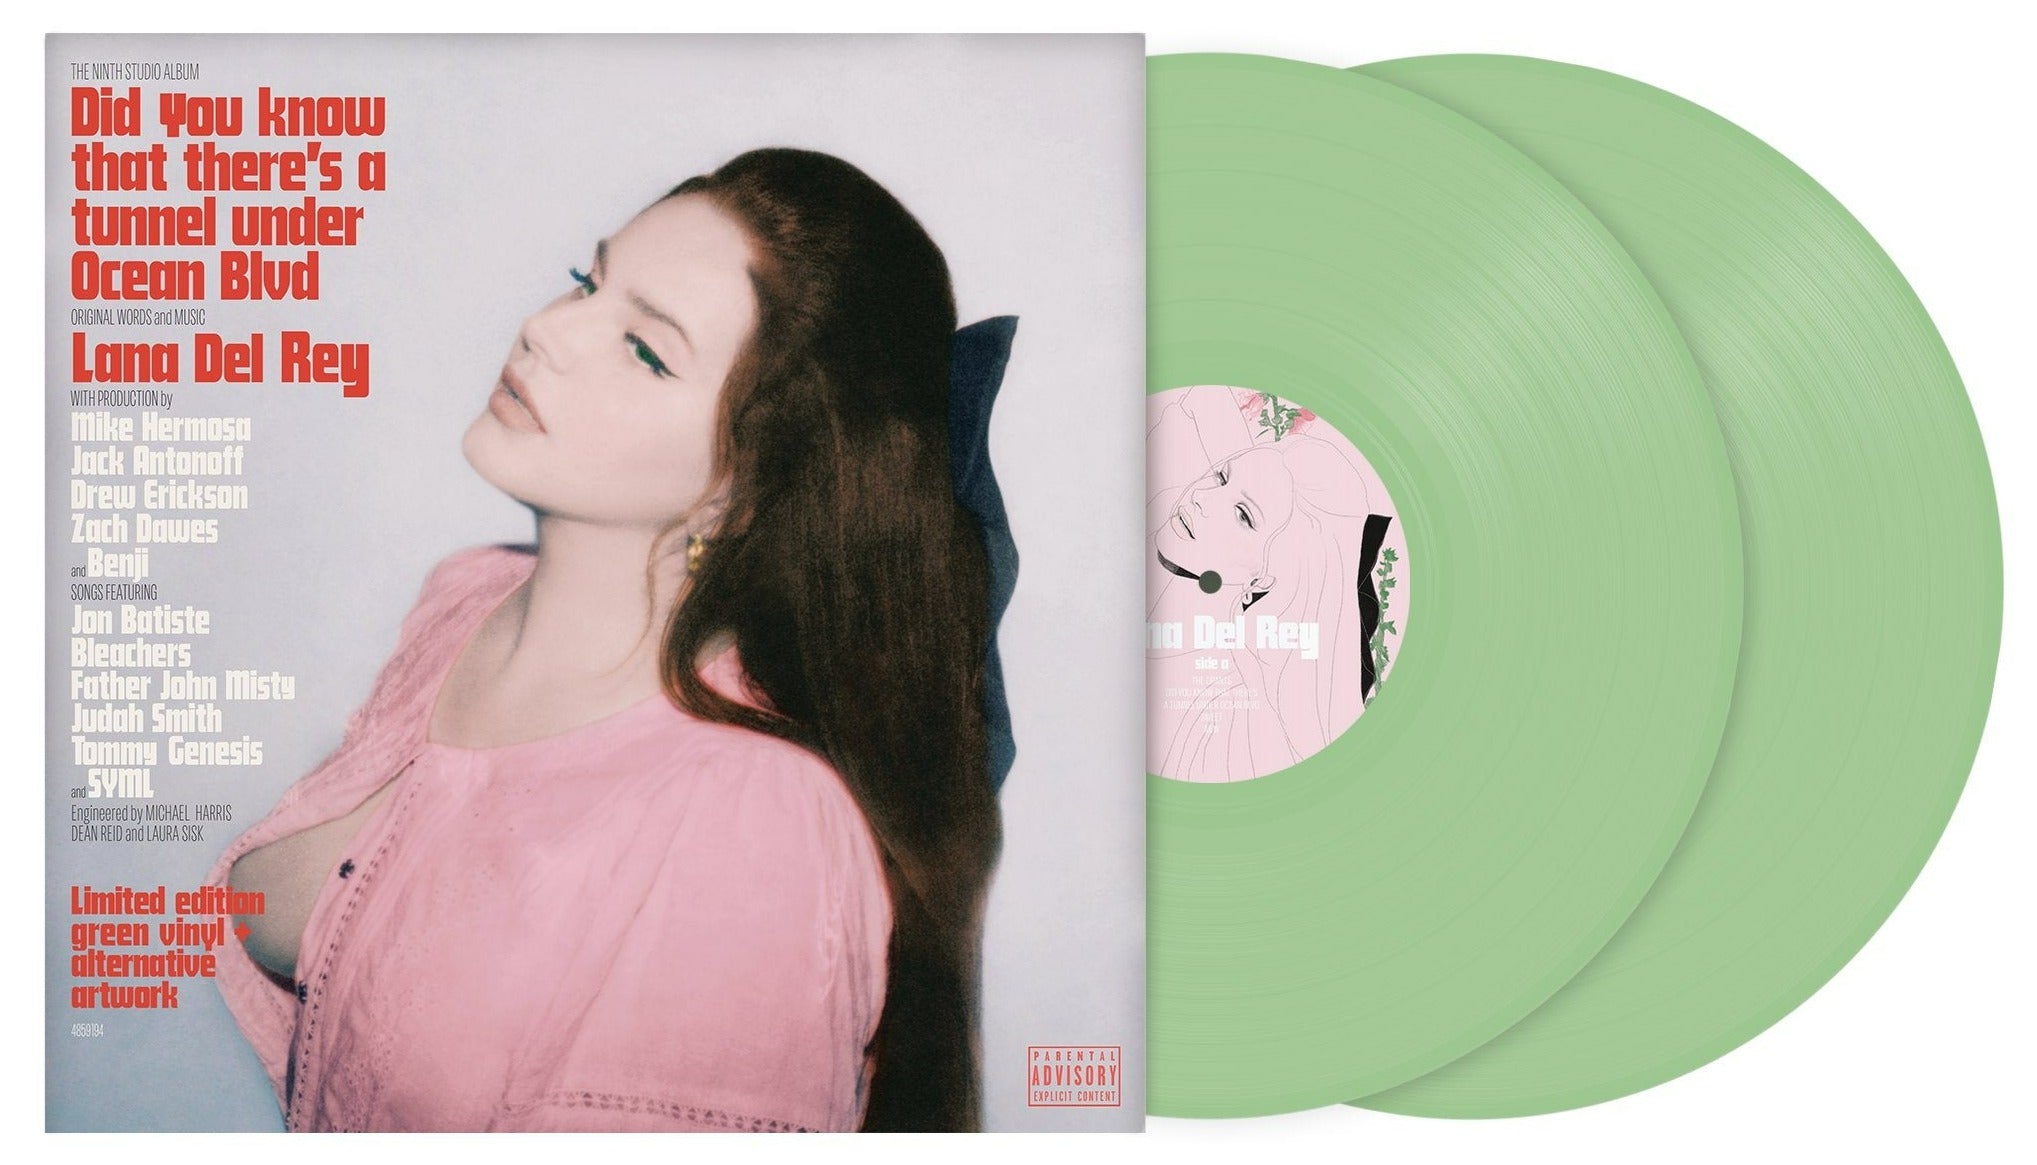 LANA DEL REY 'DID YOU KNOW THAT THERE'S A TUNNEL UNDER OCEAN BLVD' 2LP (Limited Edition, Green Vinyl)